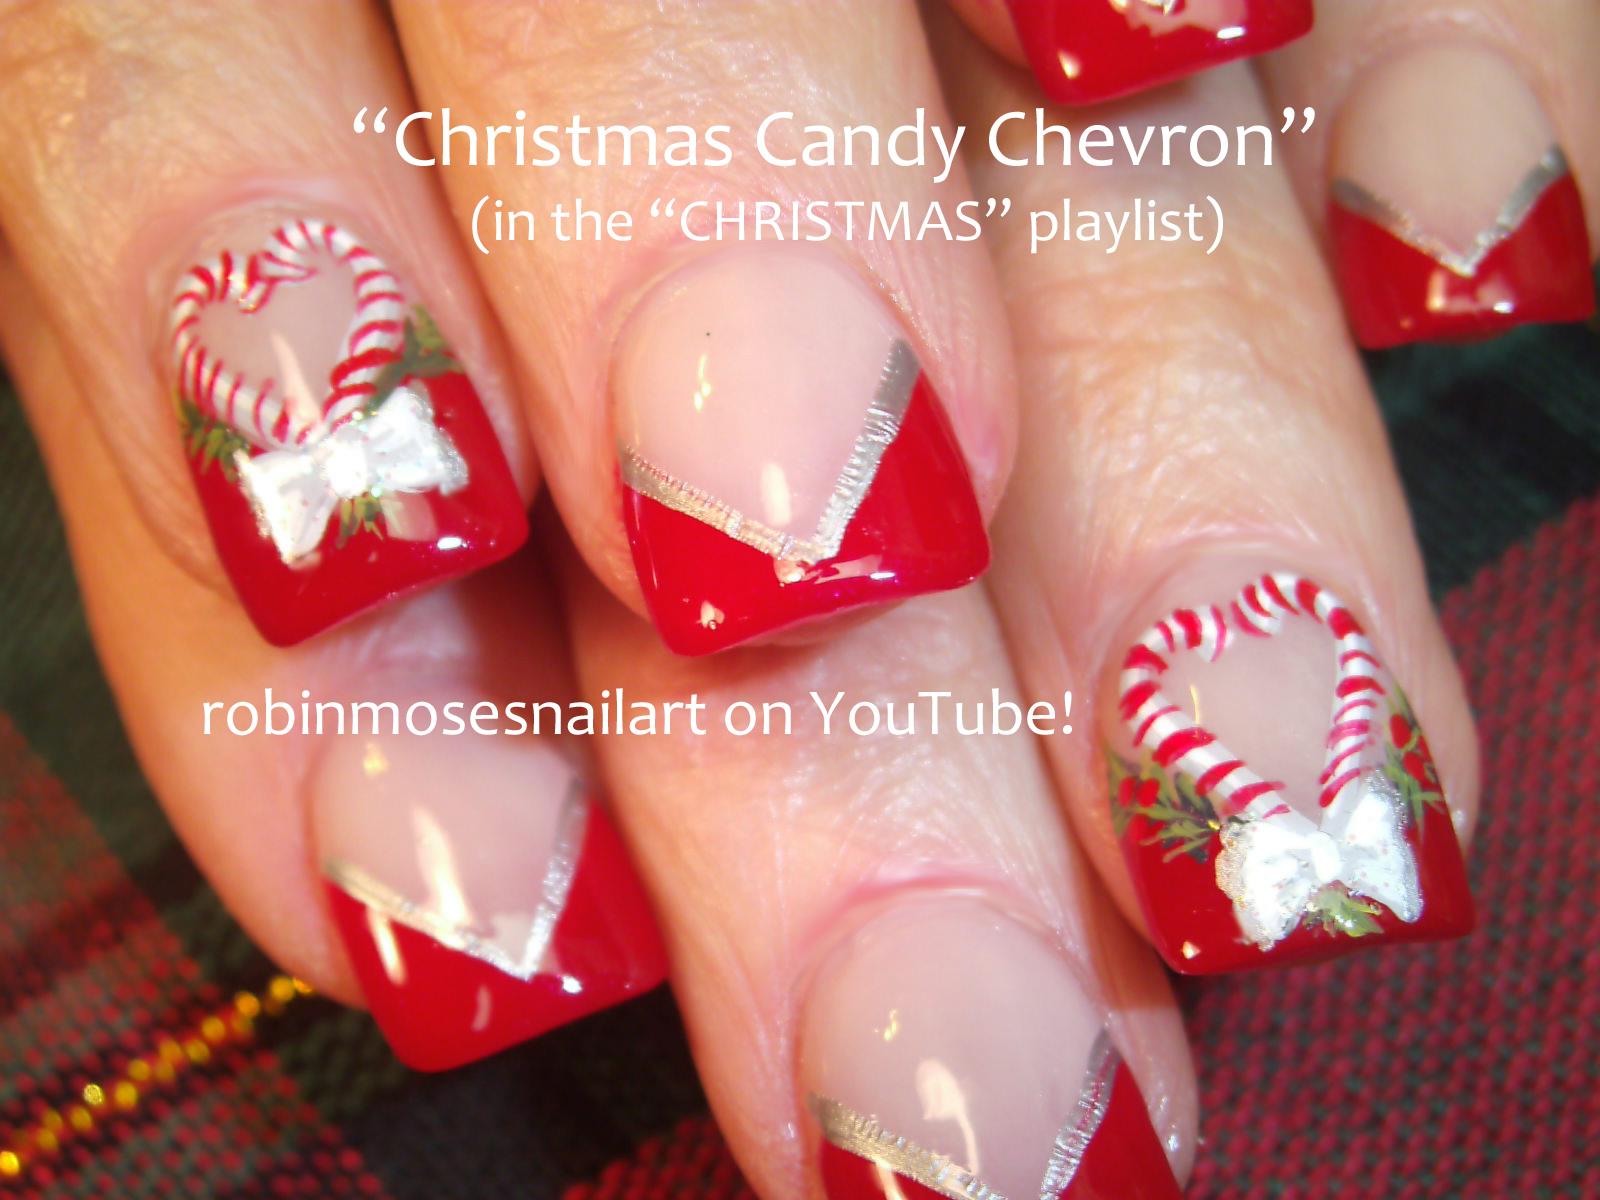 1. Candy Cane Nail Art Designs for Christmas - wide 3